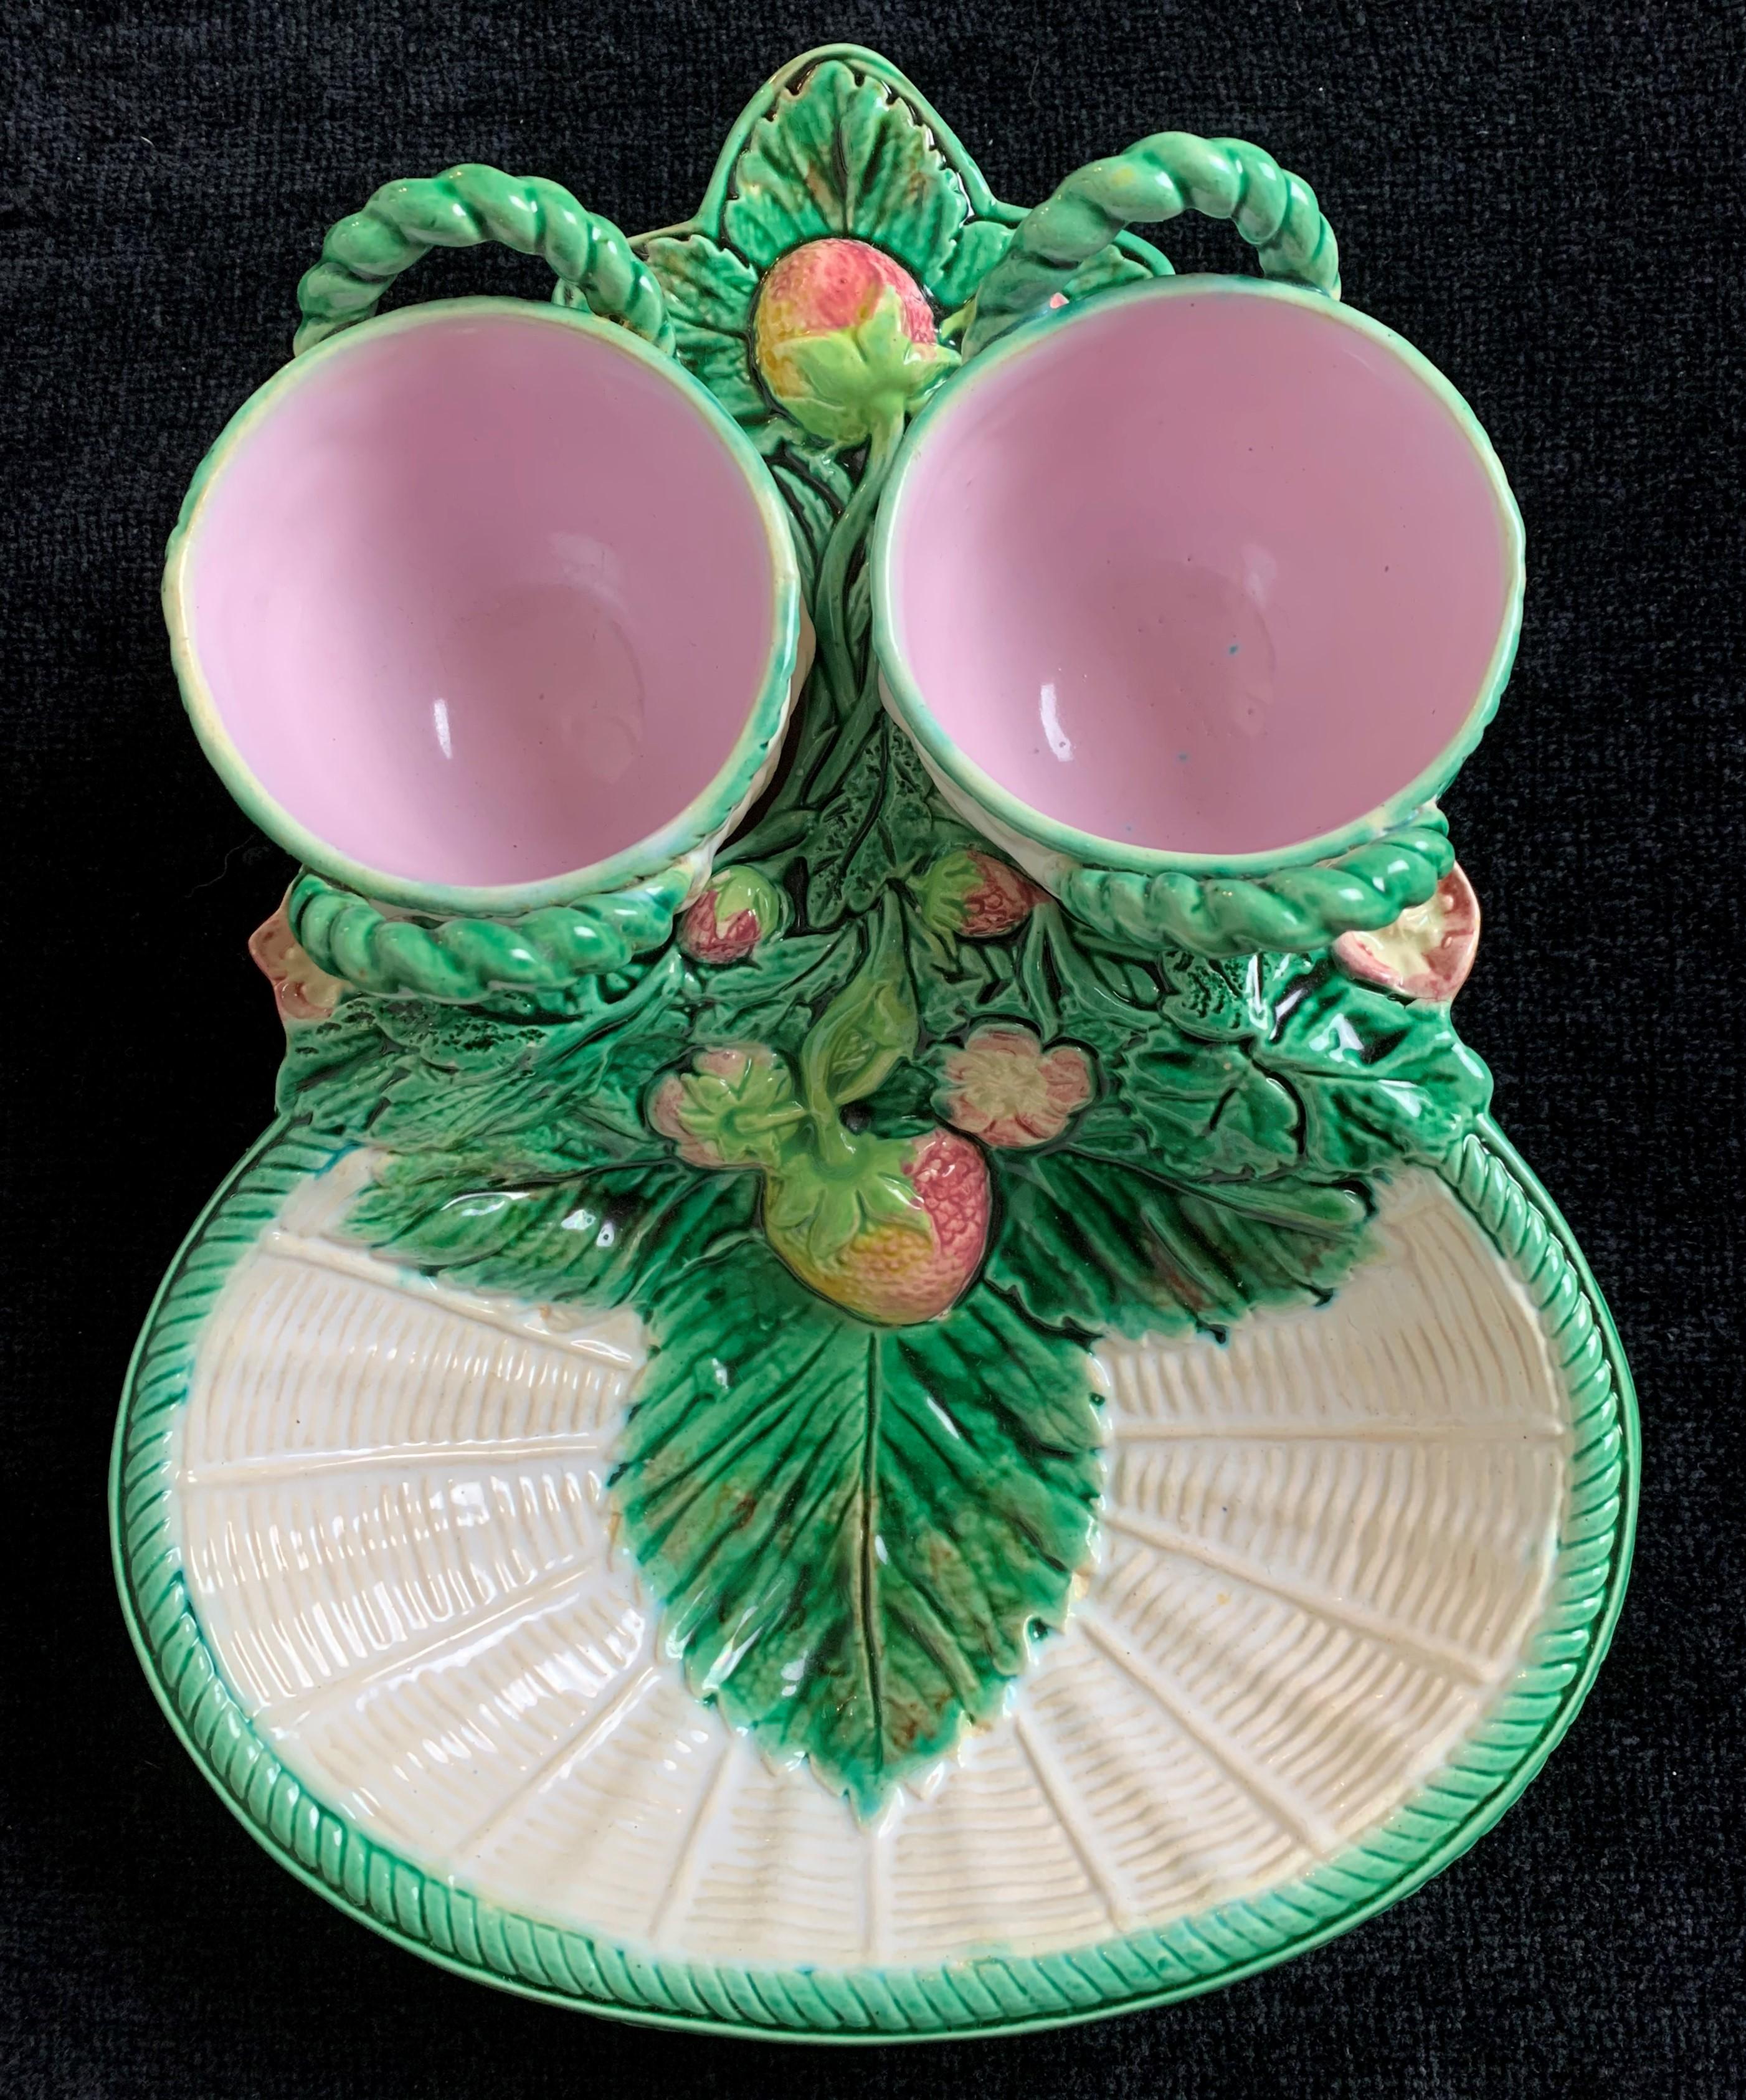 George Jones Majolica Strawberry server on white wicker ground with rare cream and sugar Baskets, English, circa 1868. Impressed British Registry Mark to reverse for 16 June 1868. This was one of the first majolica patterns registered by George